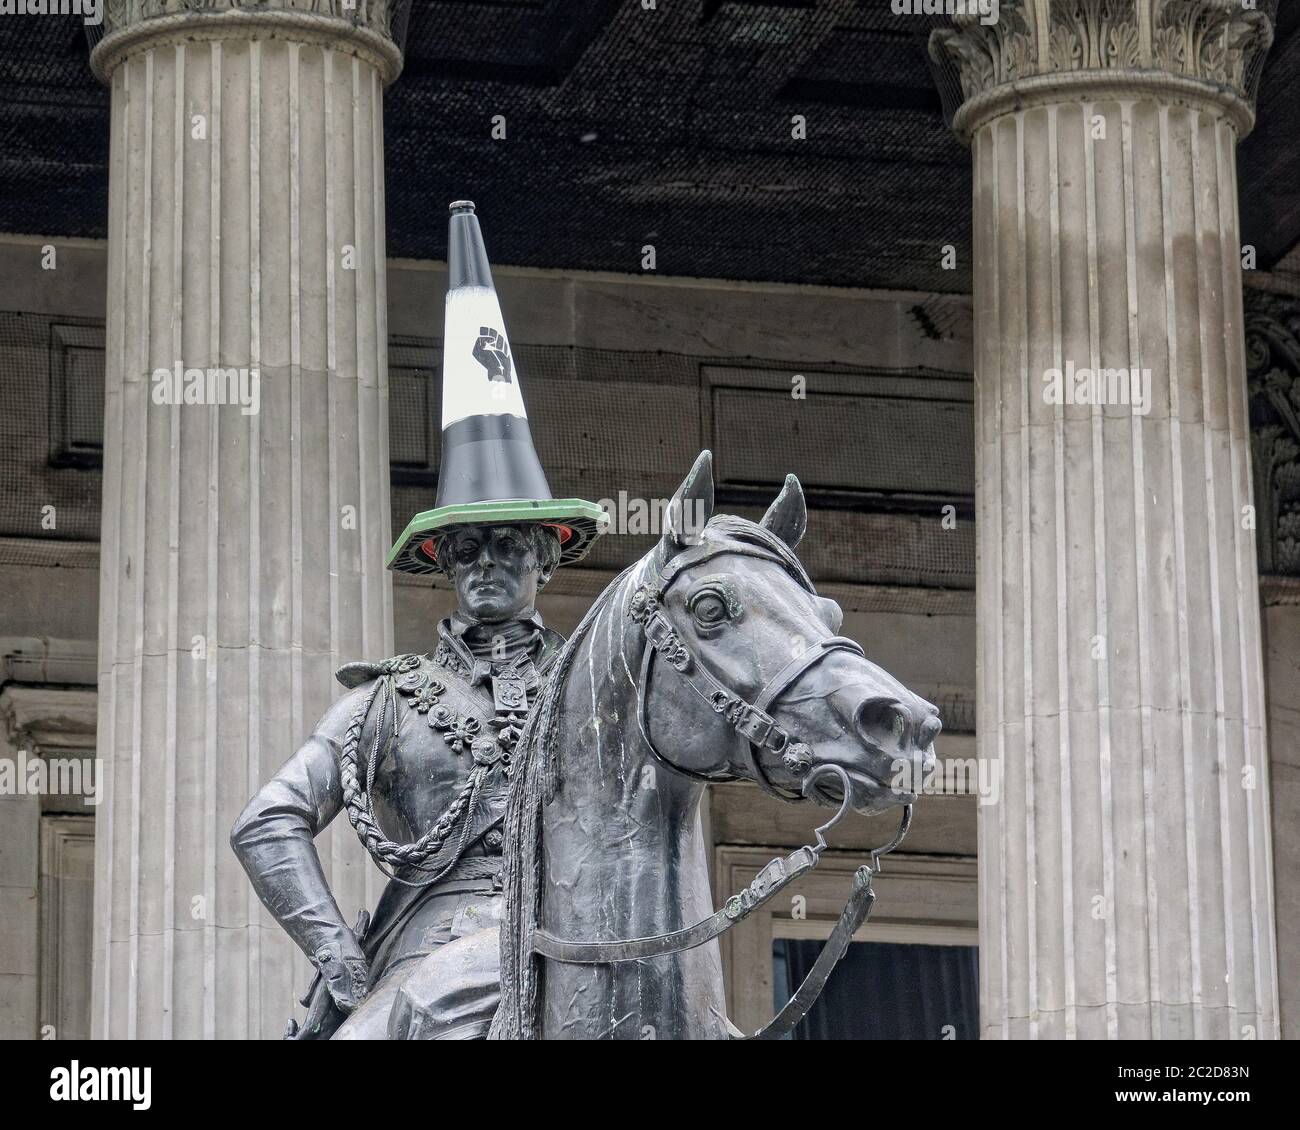 Glasgow, Scotland, UK 17th June, 2020: BLM ironically one of the targeted statues of the warmonger duke of weellington shows support as the iconic cone head is given a twist, in city centre. Credit: Gerard Ferry/Alamy Live News Stock Photo